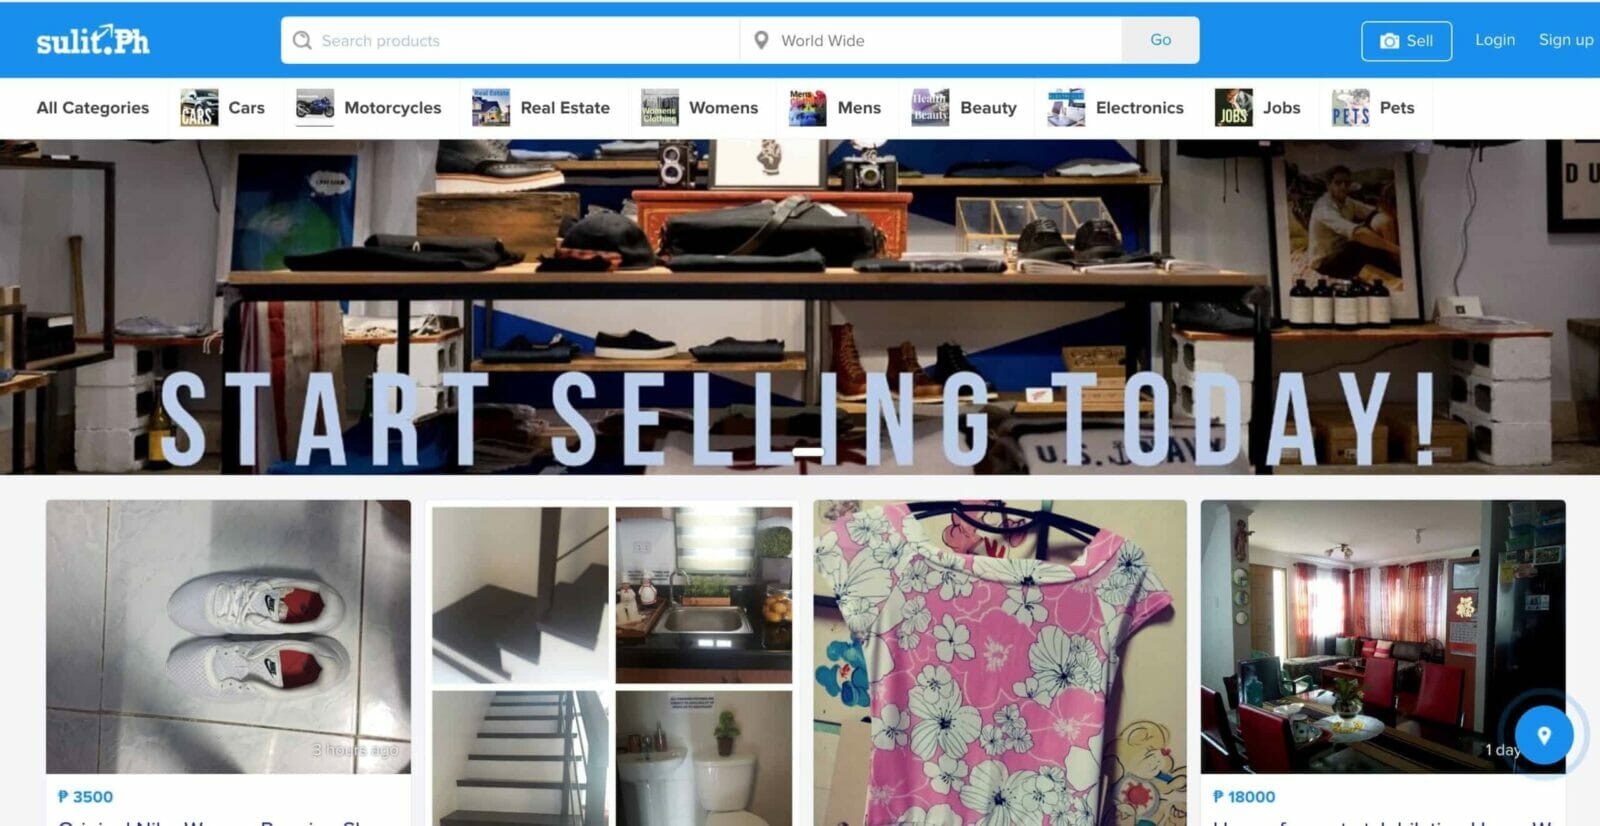 A 2018 website page showcasing the shopping experience with a picture of a clothing store.